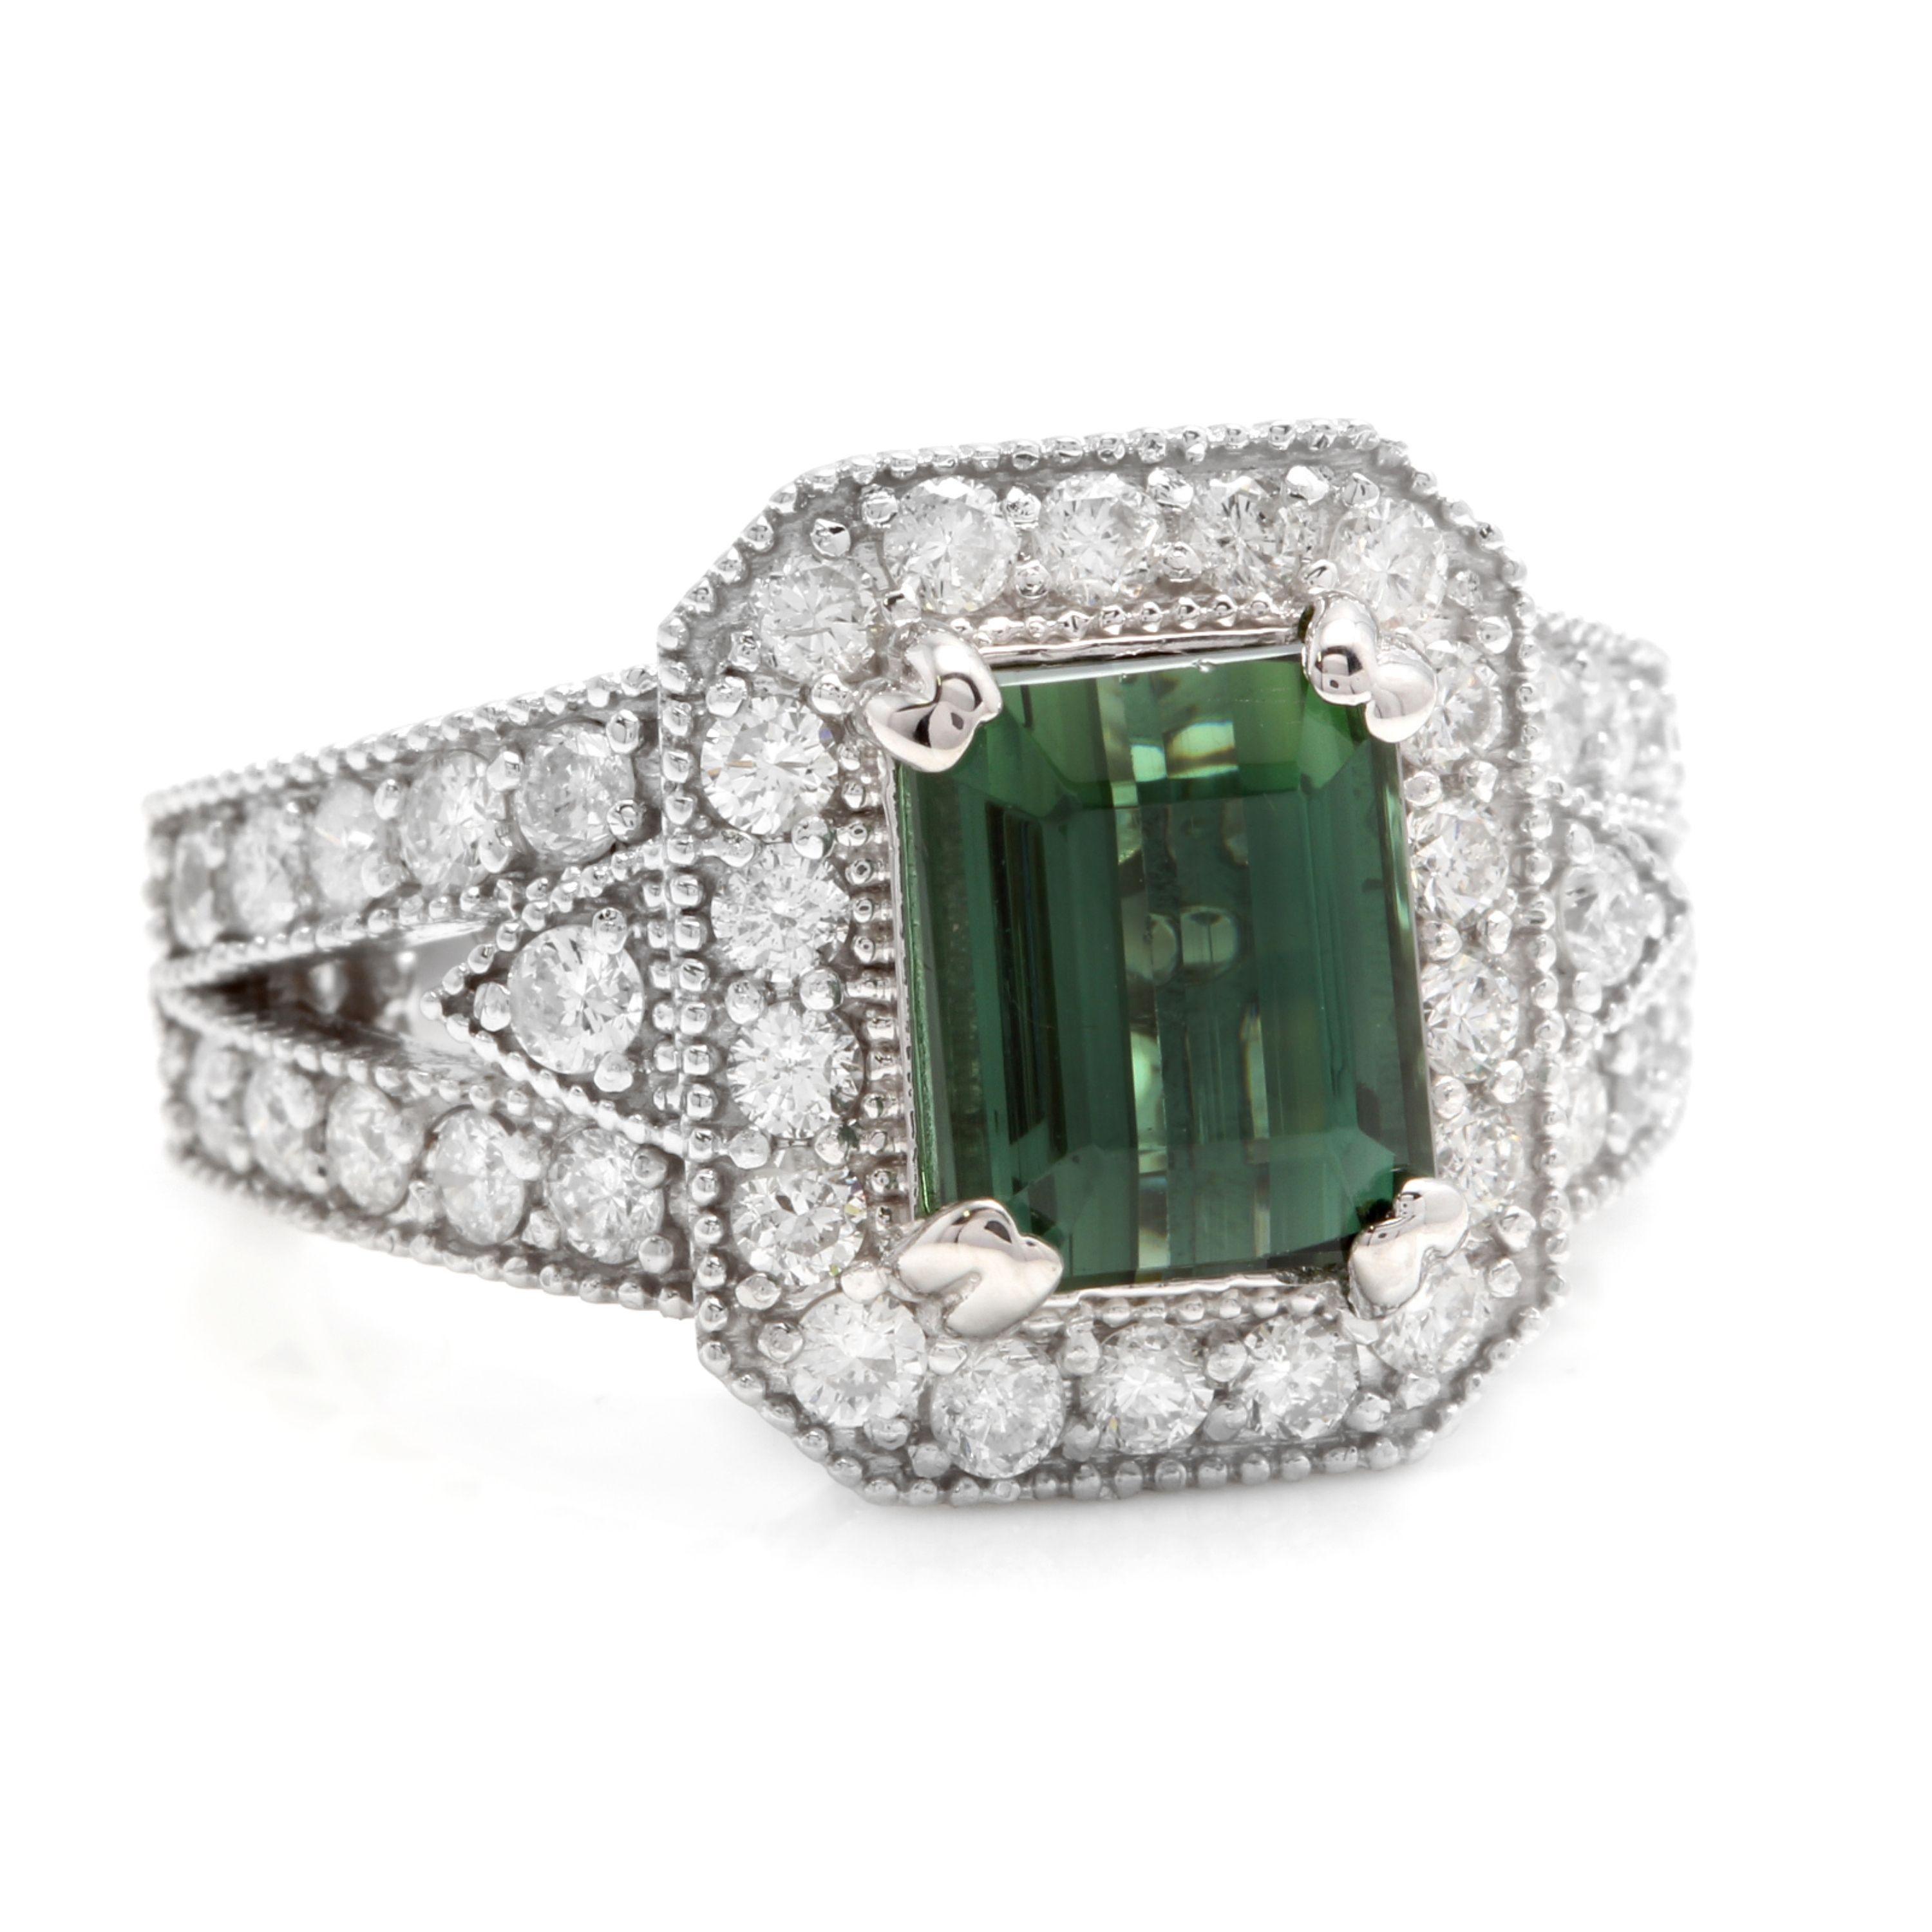 4.90 Carats Natural Very Nice Looking Green Tourmaline and Diamond 18K Solid White Gold Ring

Total Natural Emerald Cut Tourmaline Weight is: Approx. 3.70 Carats (Treatment-Heat)

Tourmaline Measures: Approx. 9.00 x 7.00mm

Natural Round Diamonds